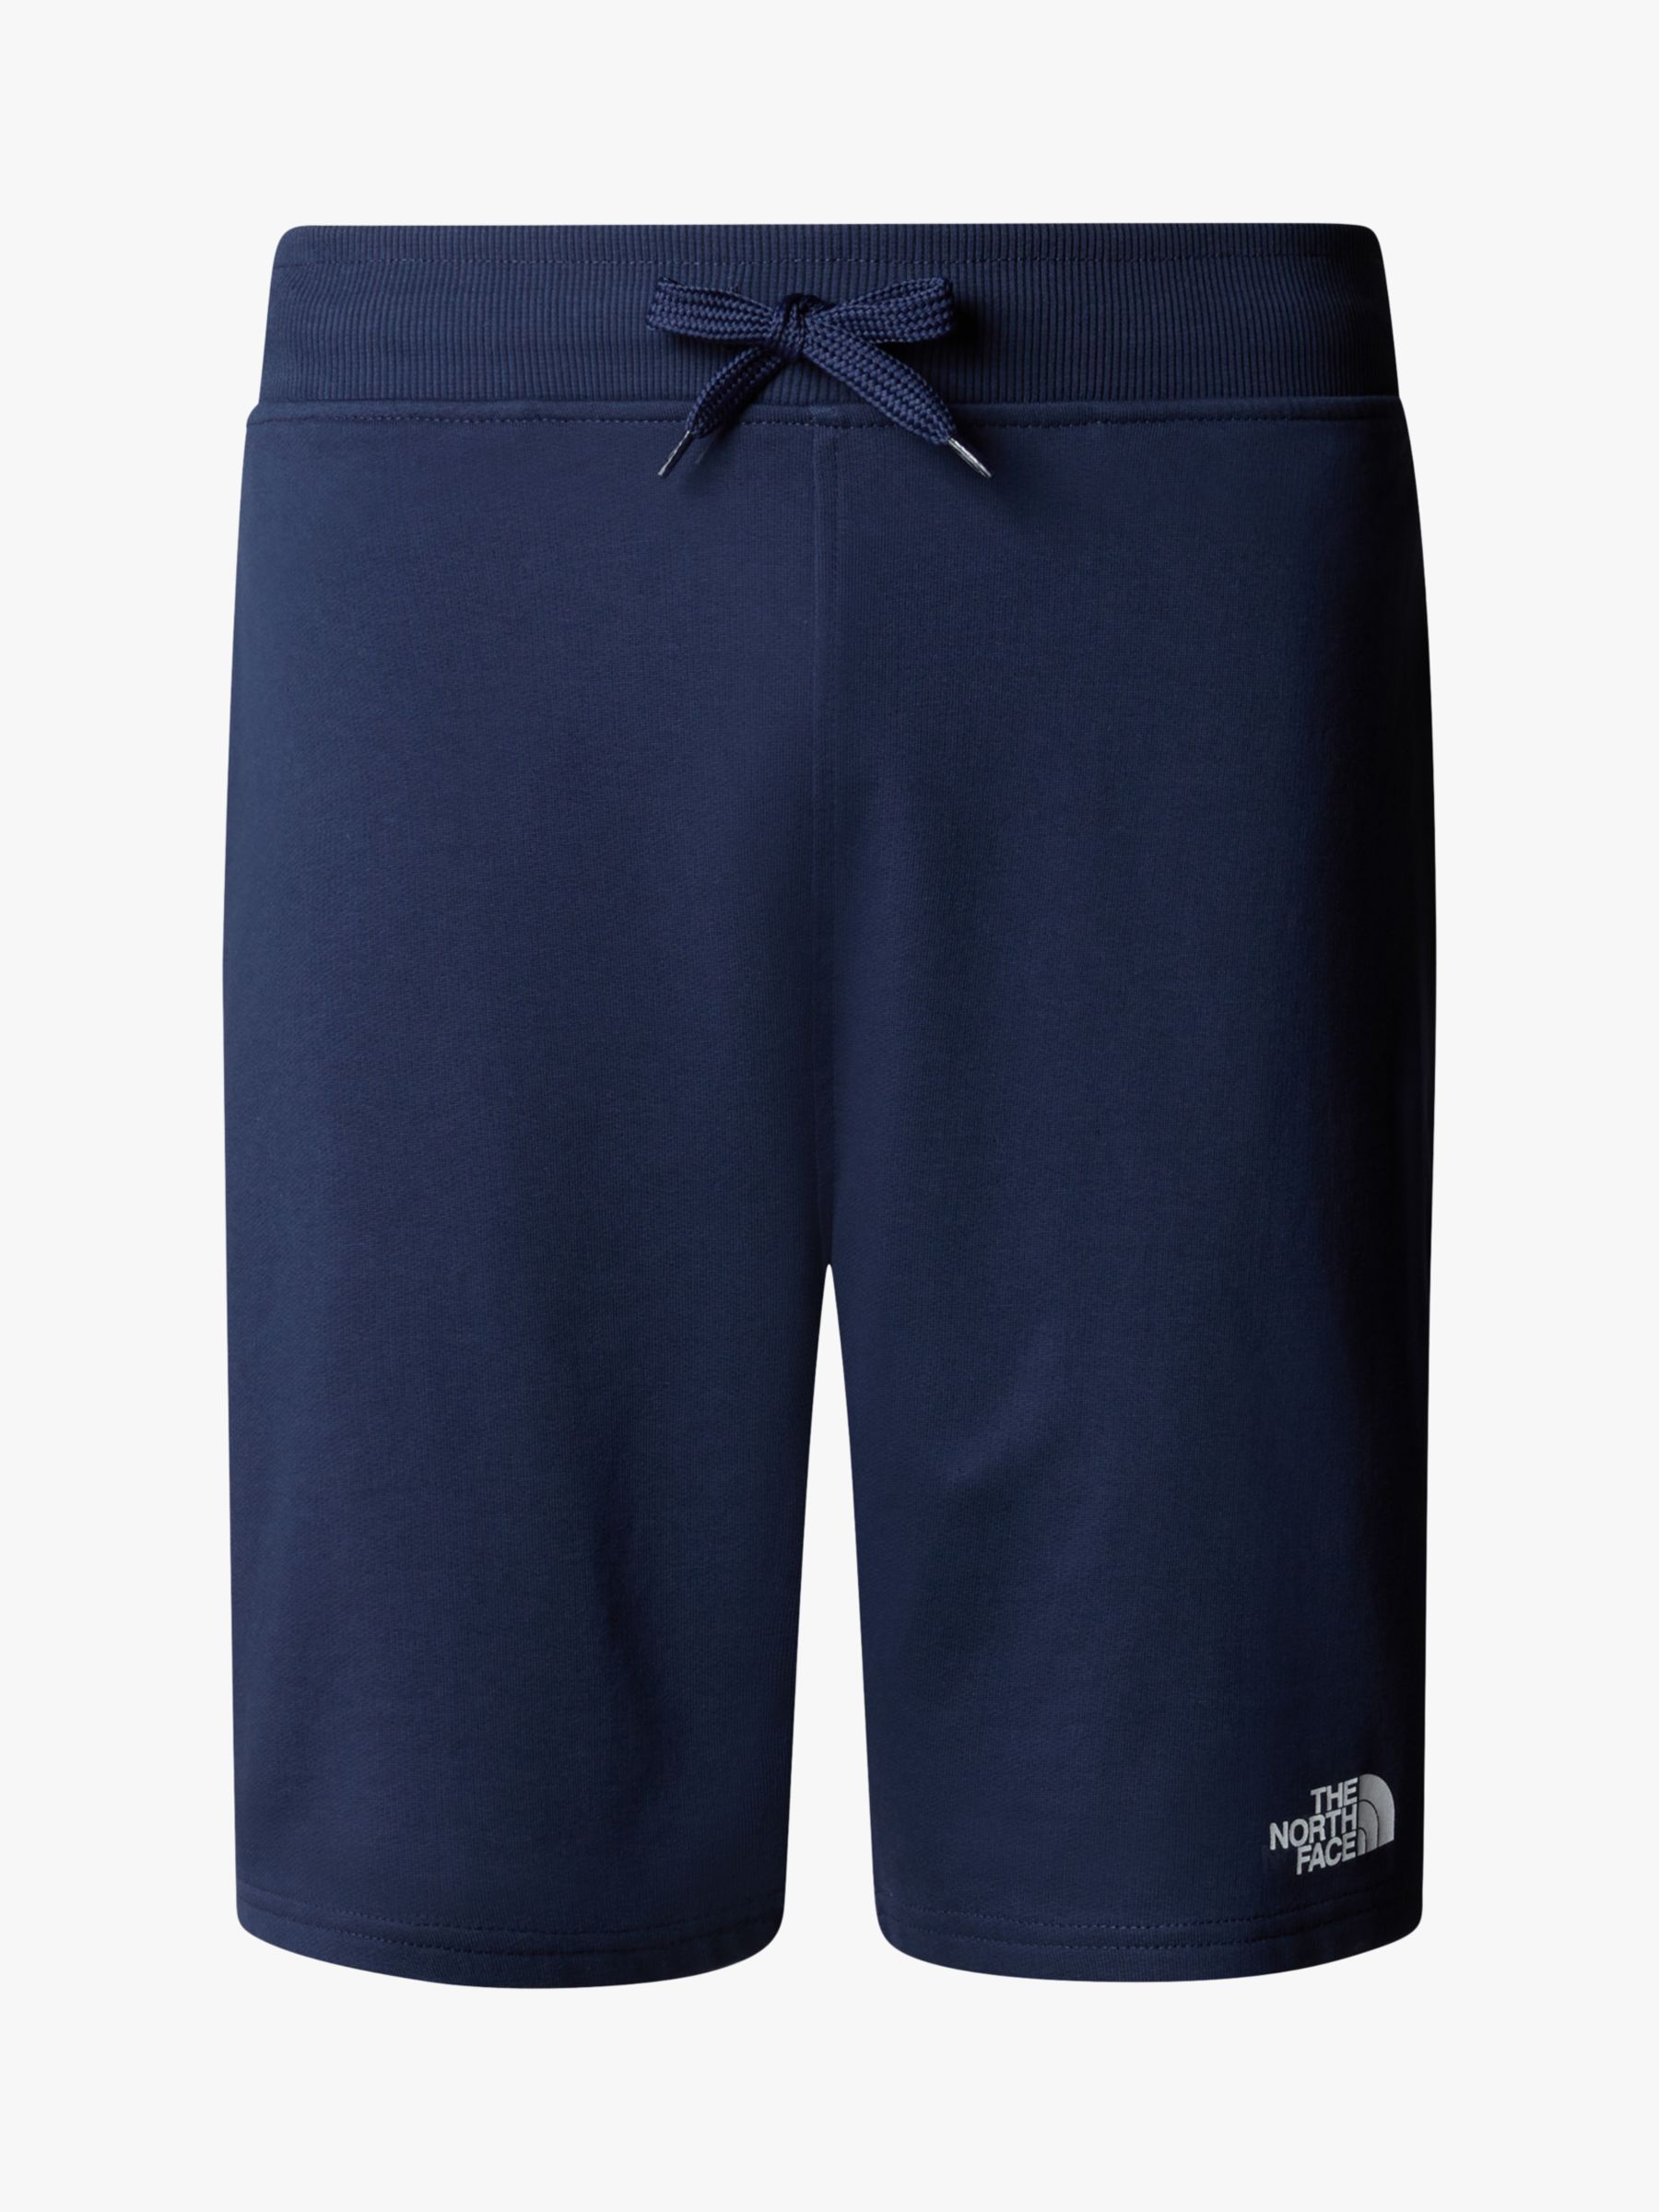 The North Face Cotton Shorts, Summit Navy at John Lewis & Partners